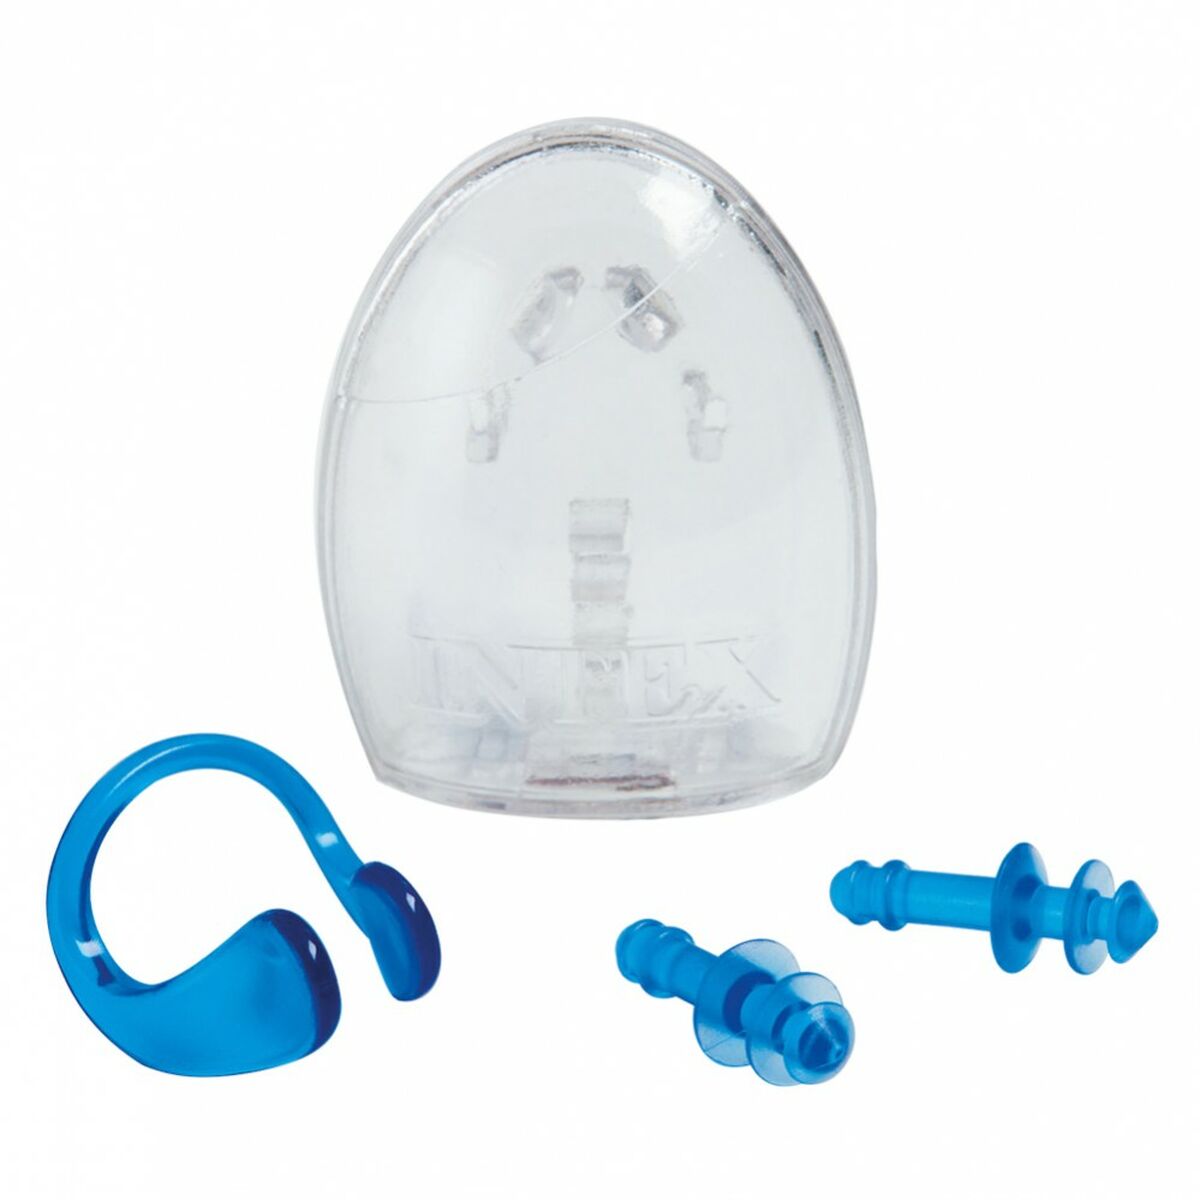 Ear plugs and nose clips for Swimming Intex